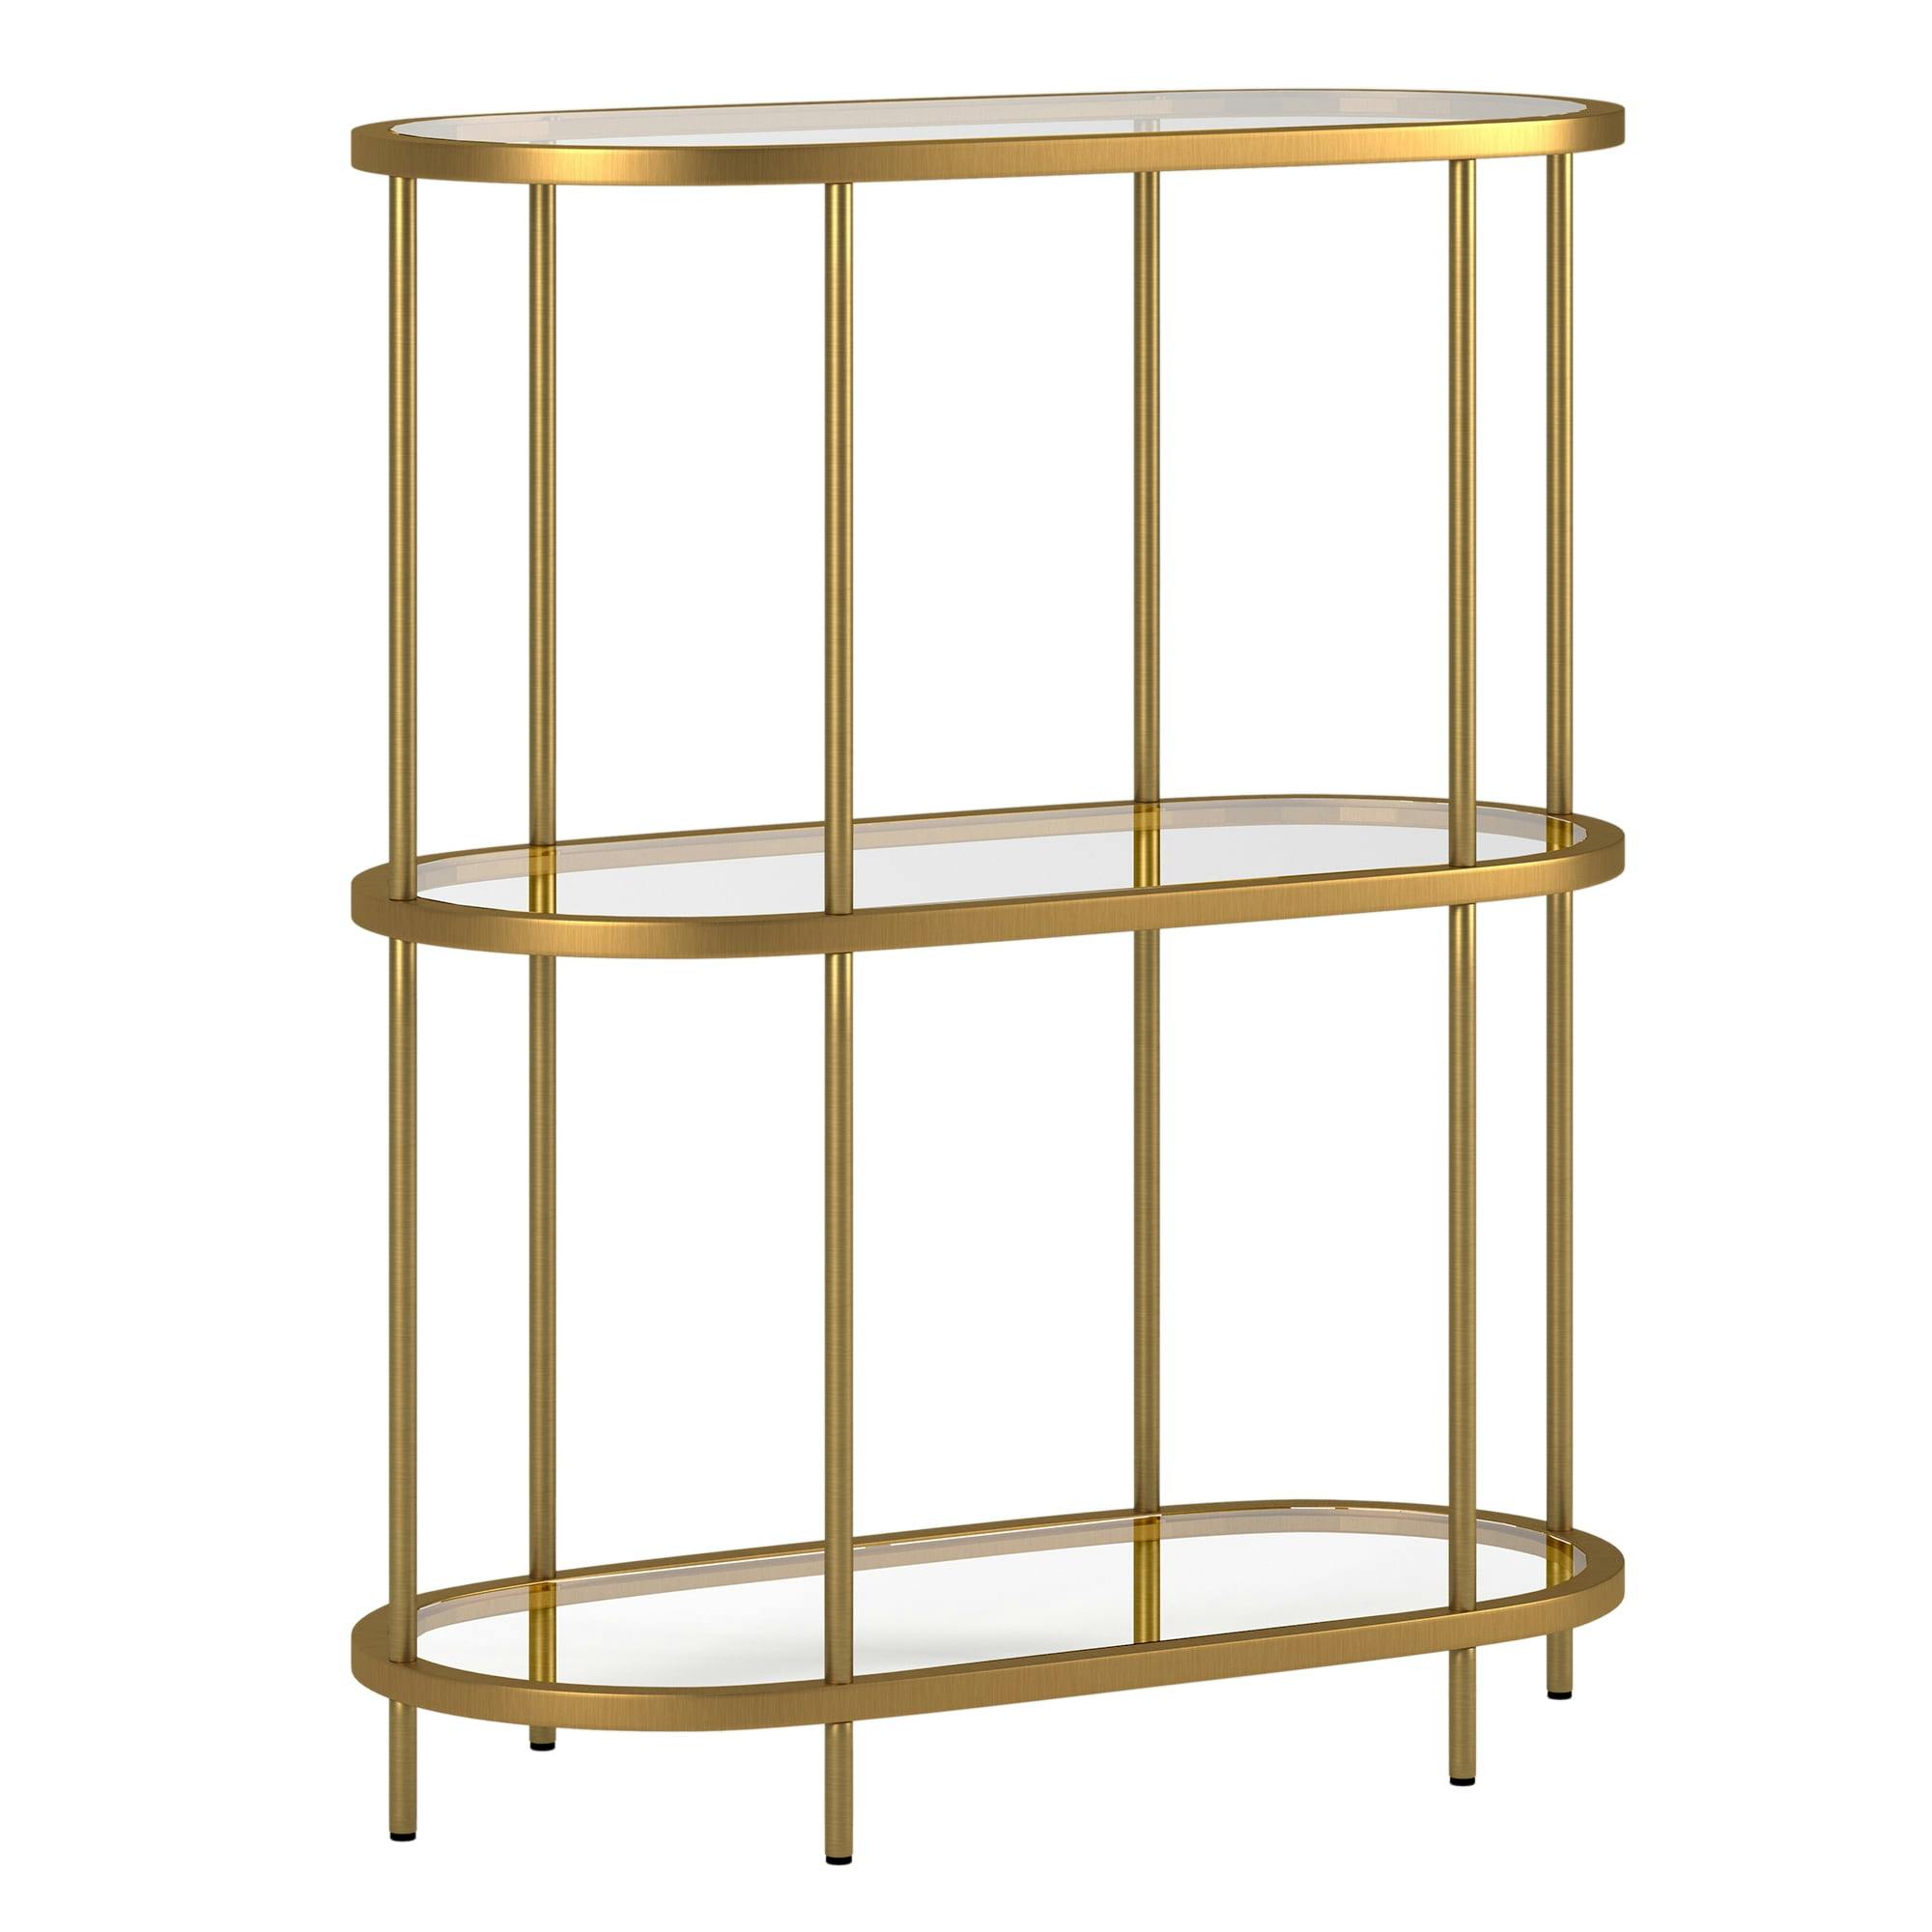 Evelyn&Zoe Leif Oval Brass Bookcase with Tempered Glass Shelves